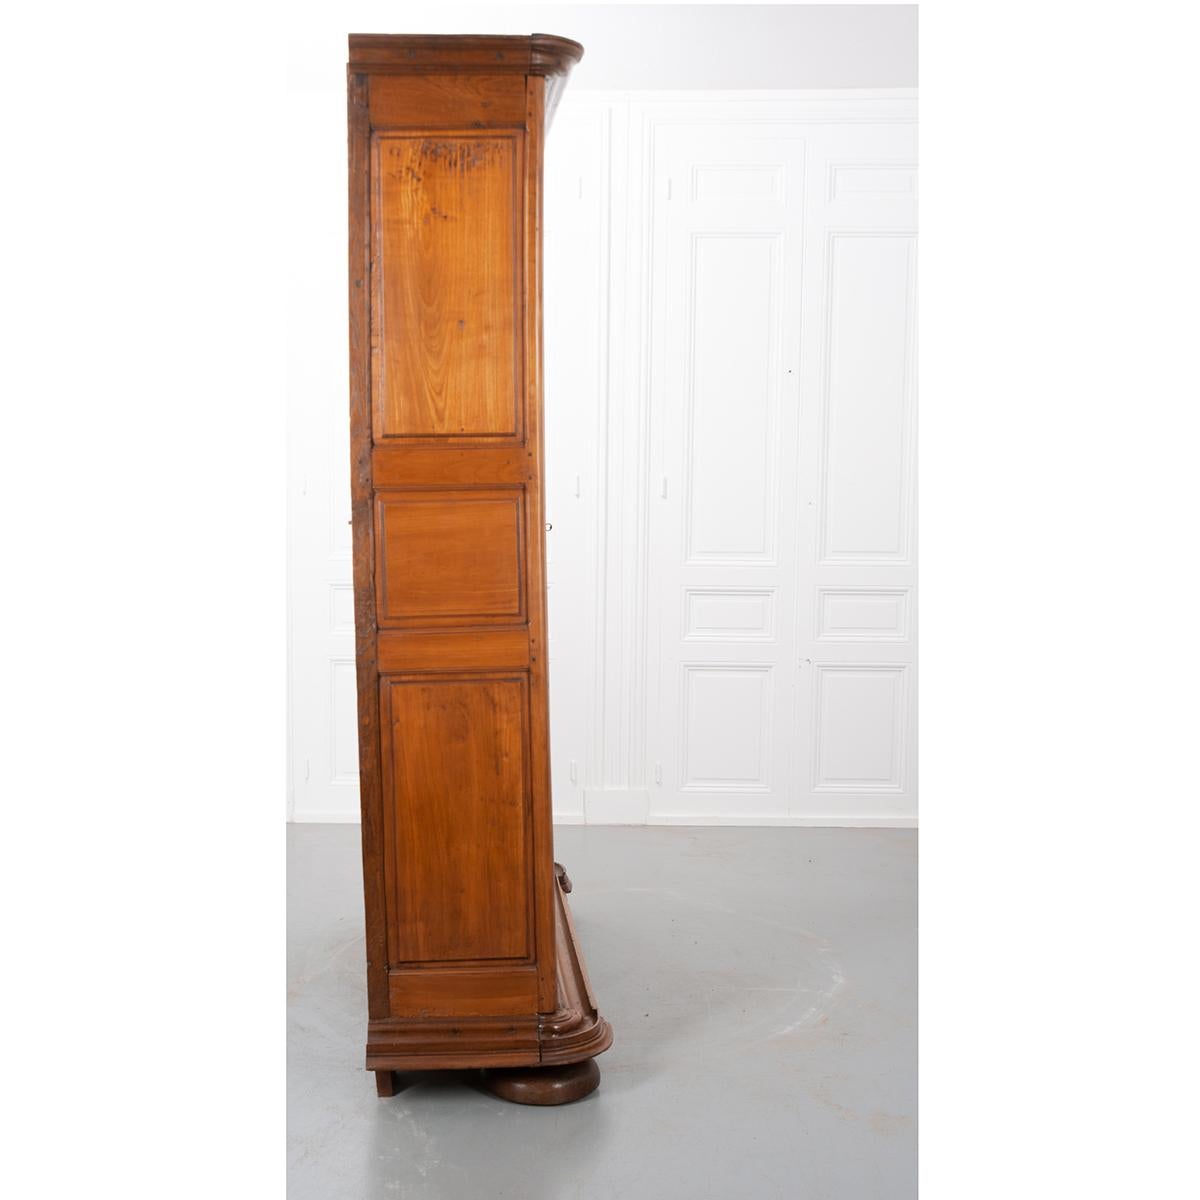 This 18th century, mixed wood French armoire is absolutely stunning. It is Gothic-style and features two tall, paneled doors on barrel hinges. One key operates the locking right door and acts as a pull. The left door latches from the inside to keep